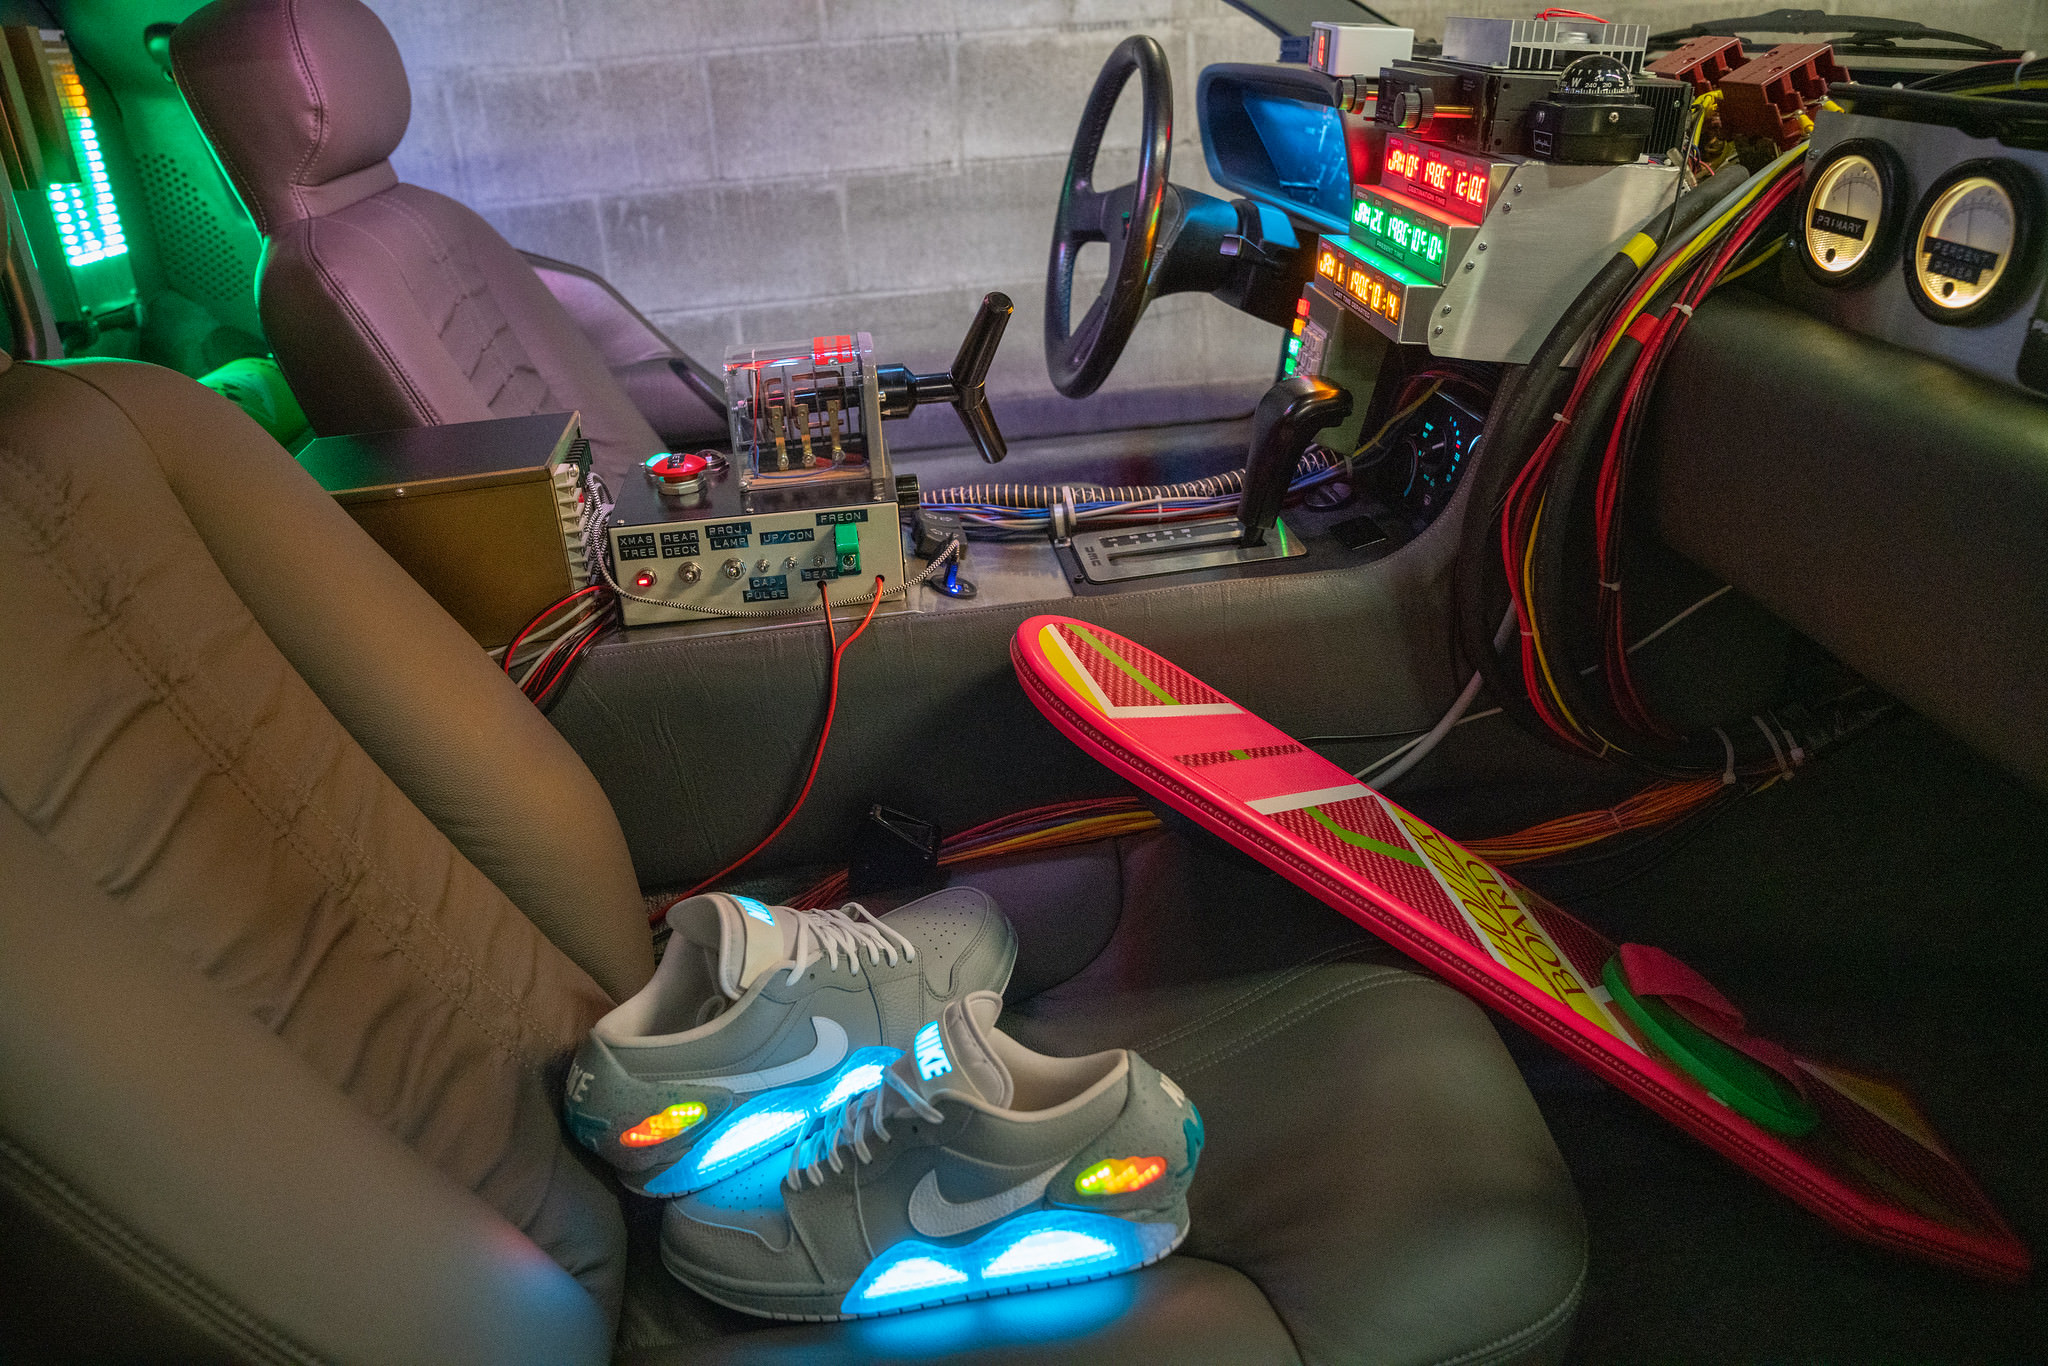 DeLorean 'Time Machine' replica interior: Time circuit switch and display, a hoverboard, and some custom Nike Air Jordan sneakers modified to include the blue 'Mag' cut-outs and heel caps similar to the sneakers in the second movie.